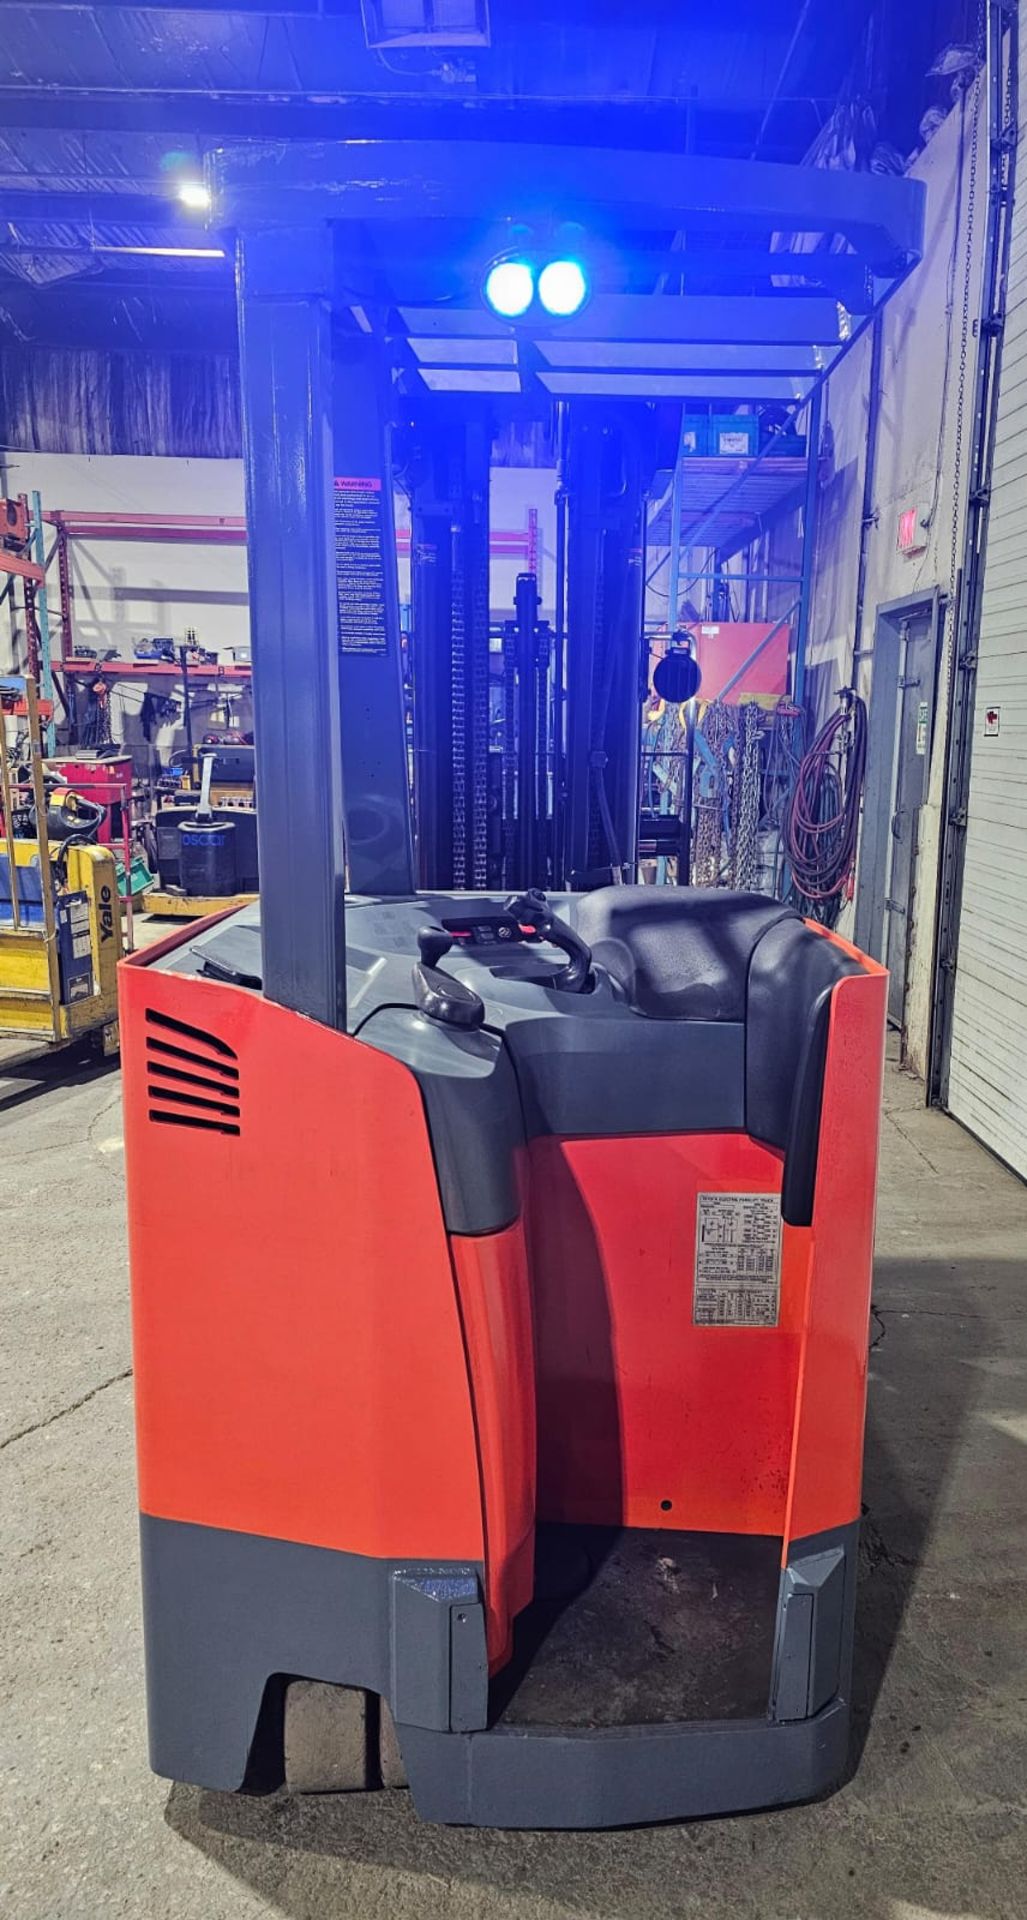 2017 Toyota 4,000lbs Capacity Electric Forklift with 4-STAGE Mast, 276" load height sideshift, 36V - Image 3 of 7